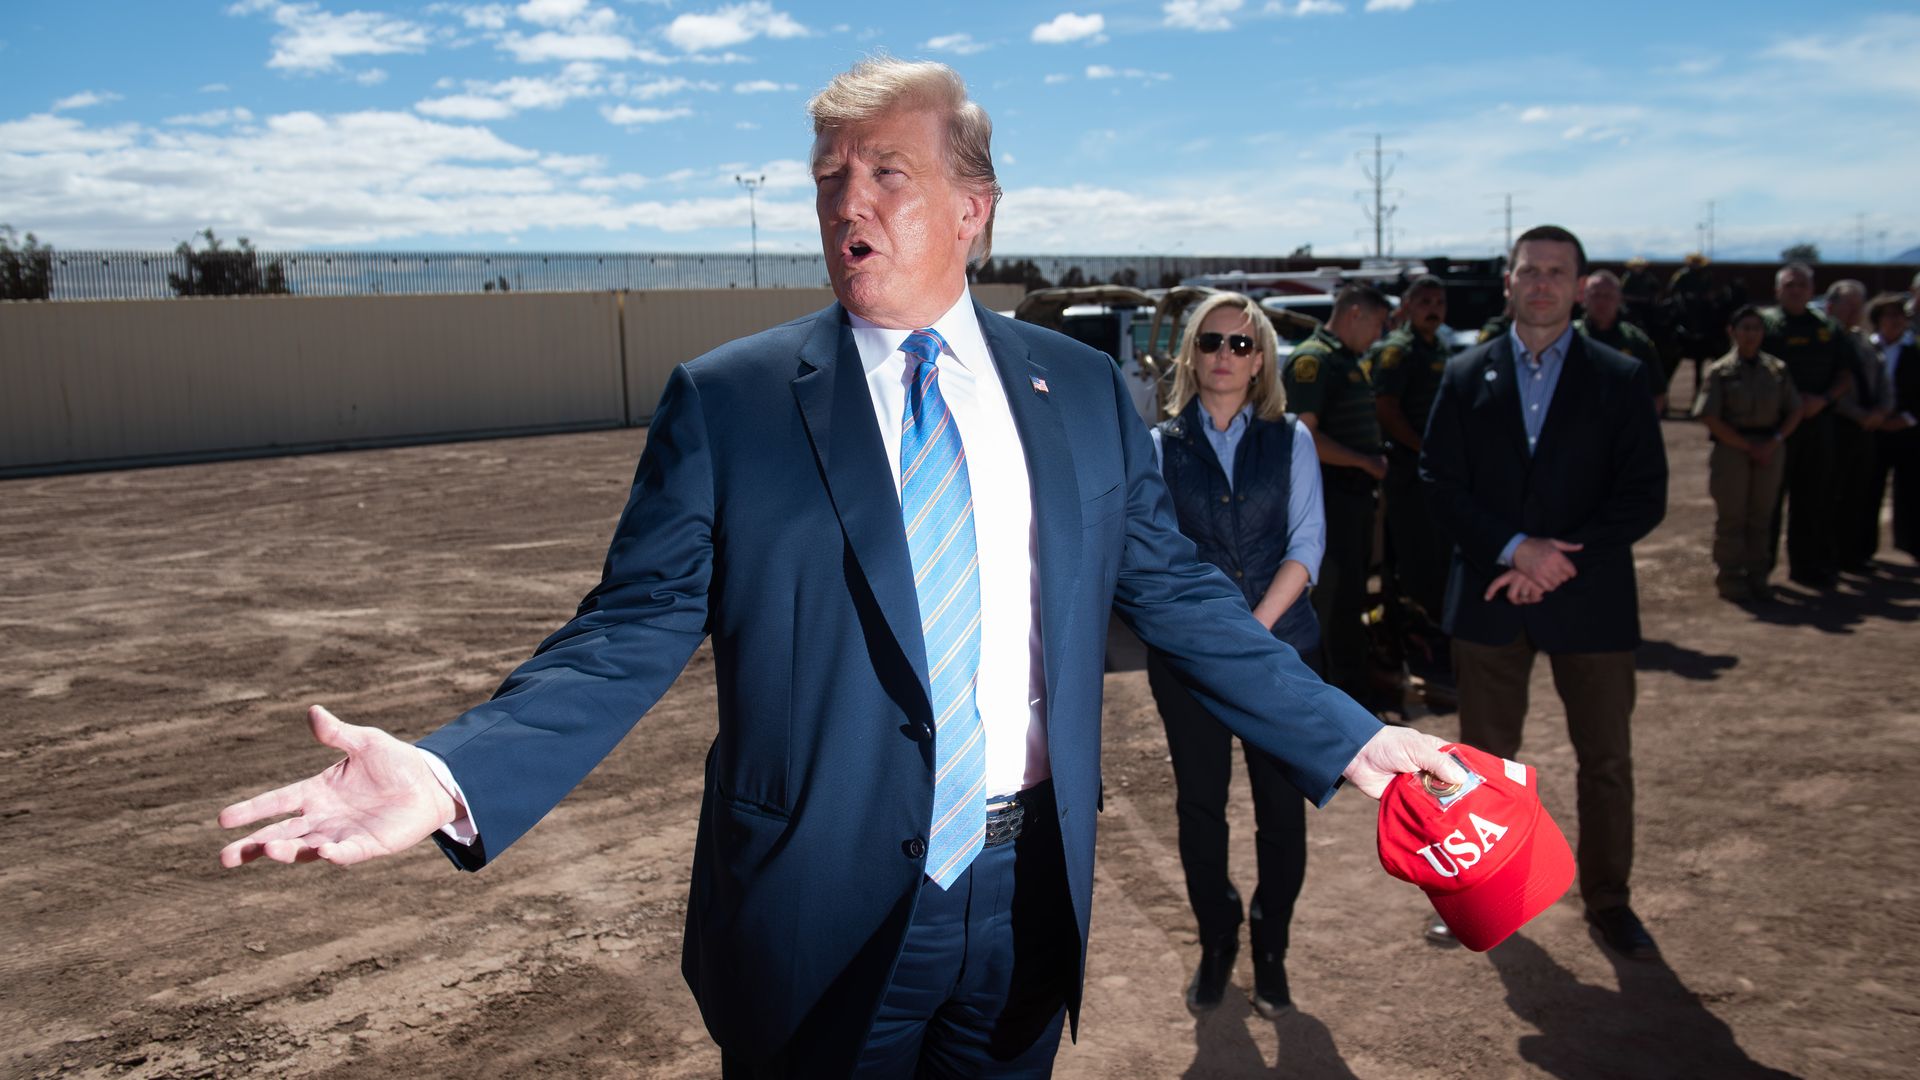 Donald Trump holding a red hat at the border, with former DHS Secretary Kirstjen Nielsen behind him